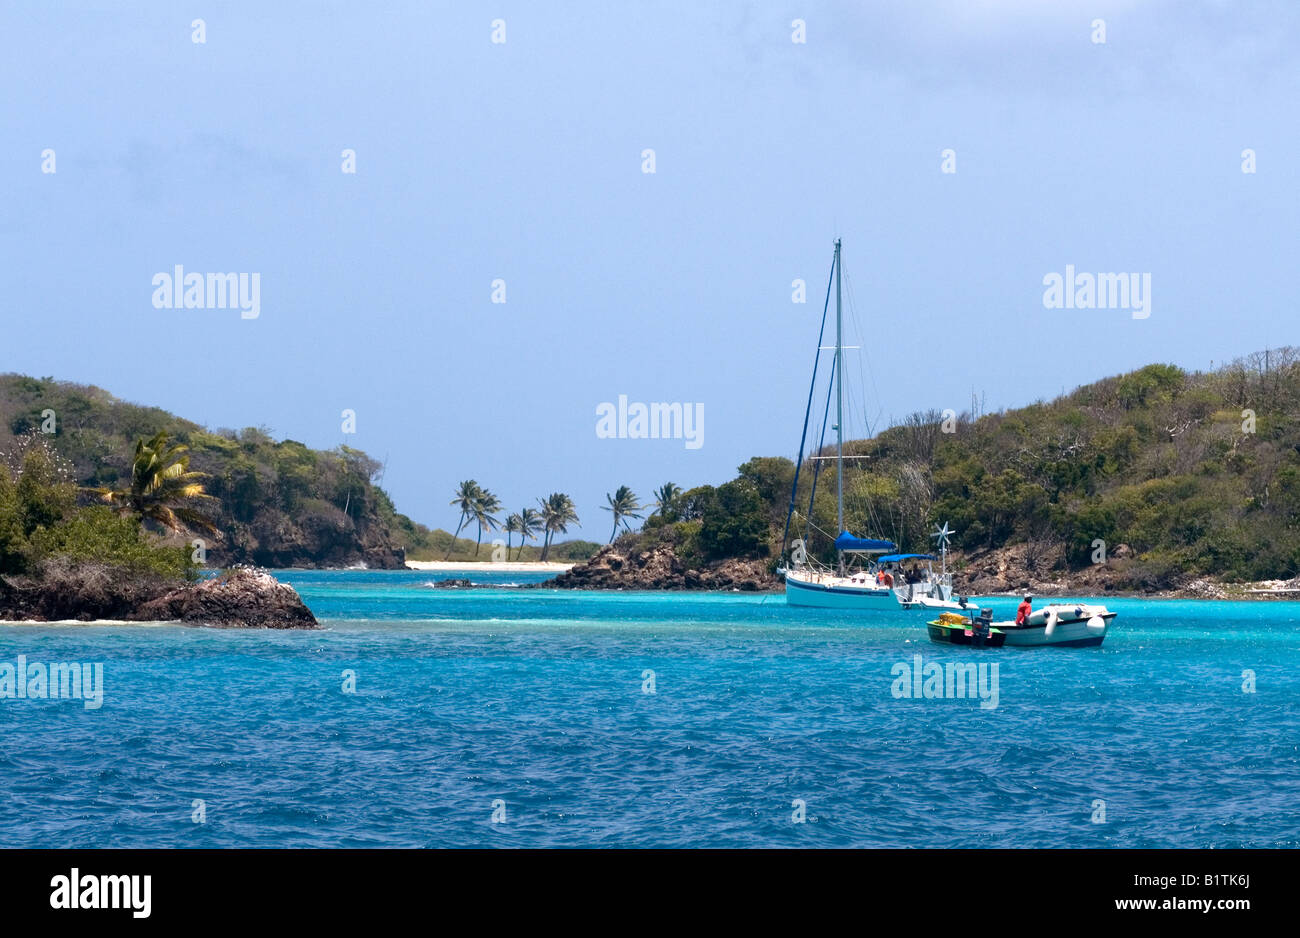 Water taxi and yacht between two islands - Petit Rameau and Petit Bateau - in the Tobago Cays, Eastern Caribbean Stock Photo